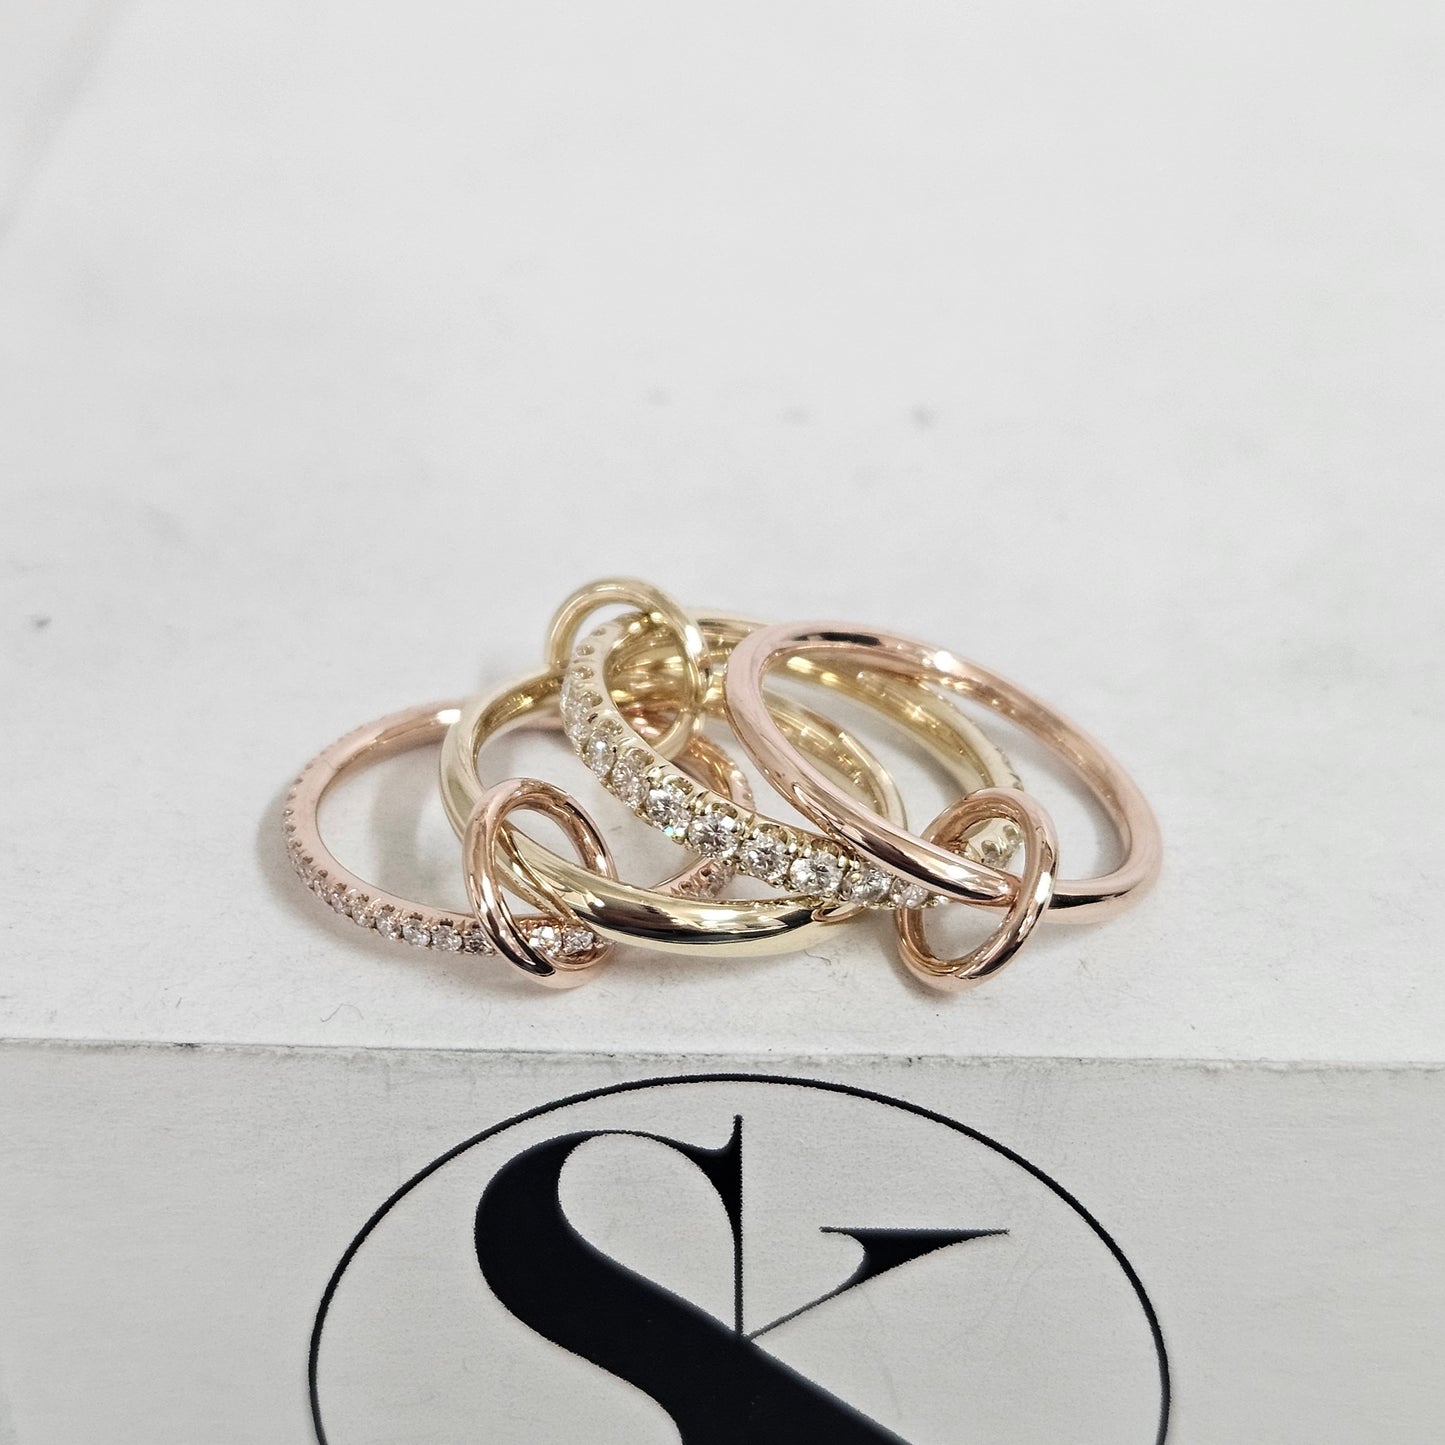 Stacking Rings with Connectors/Yellow Rose White gold 4 Bands with 3 connectors/Eternity Diamond Rings for Everyday/Sean's Bundle of 4 Rings